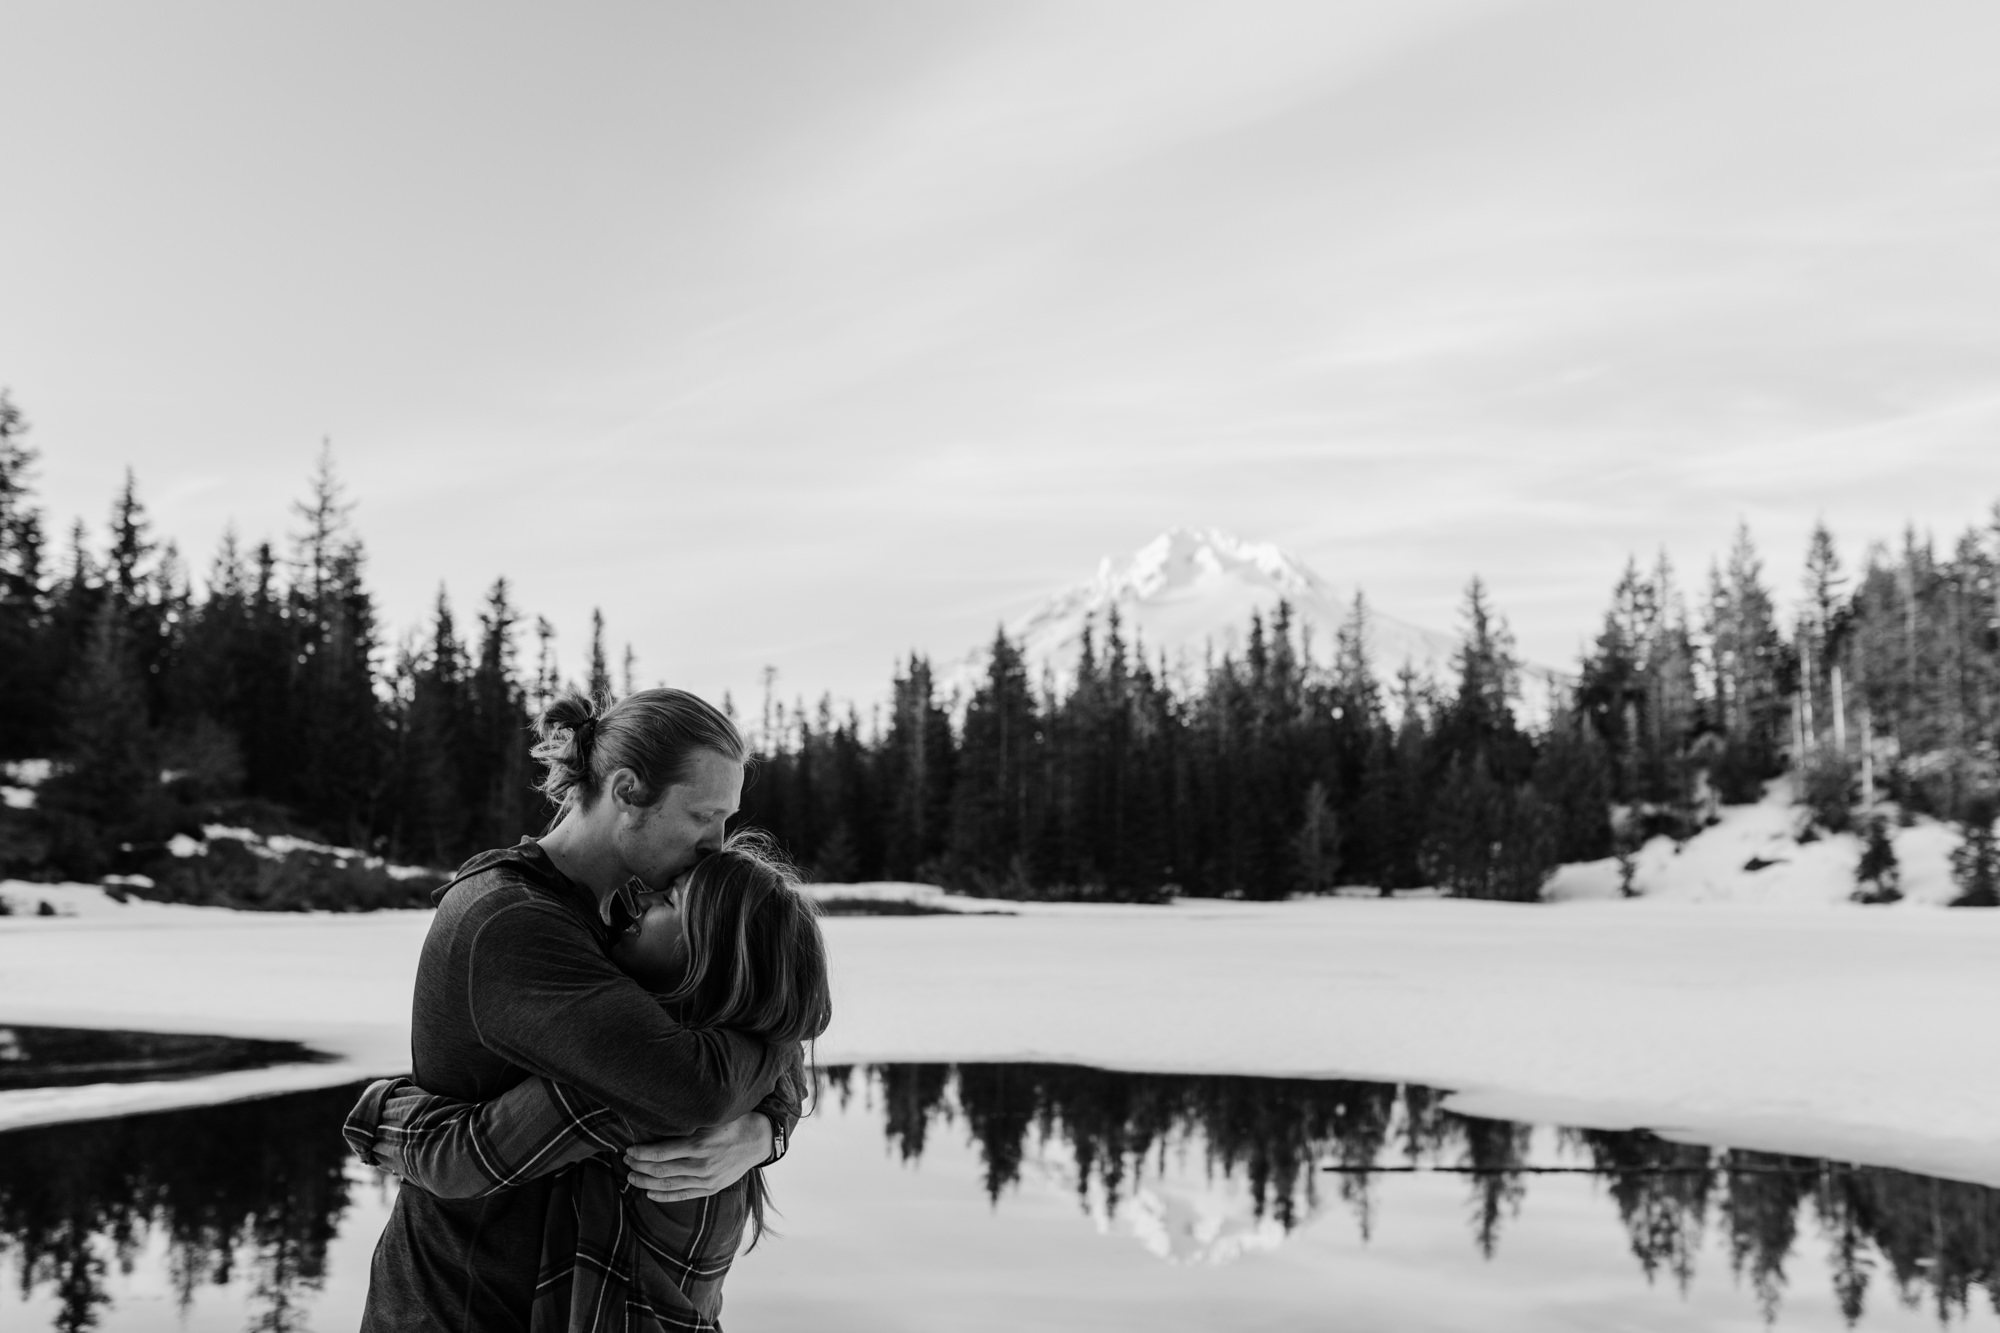 Lindsay + Heath | Mt. Hood National Forest Engagement Session | Portland, Oregon Adventure Wedding Photographer | Snowy Adventure in the Mountains | www.thehearnes.com